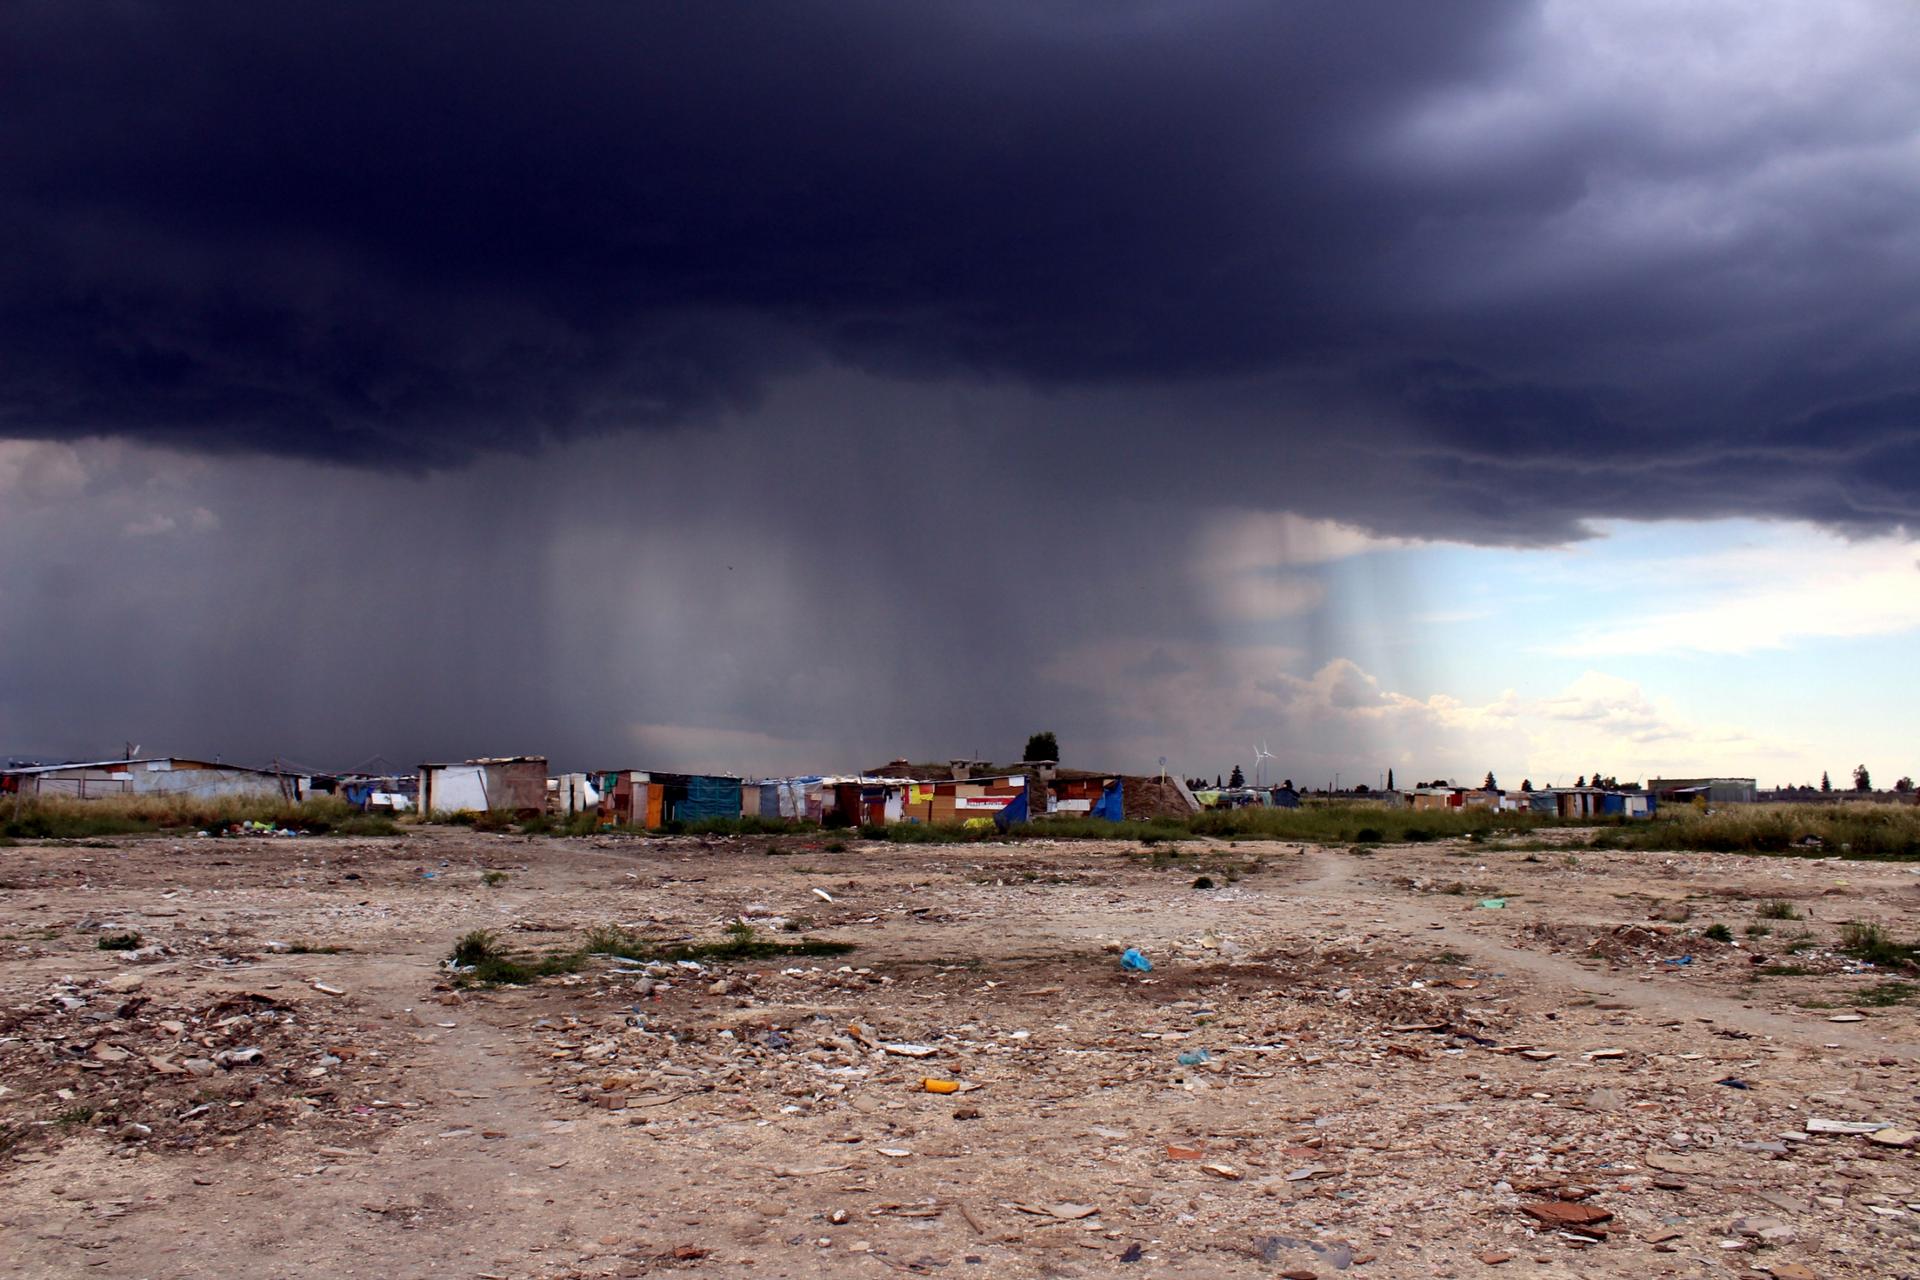 Storm clouds gather over the "ghetto" where migrants live